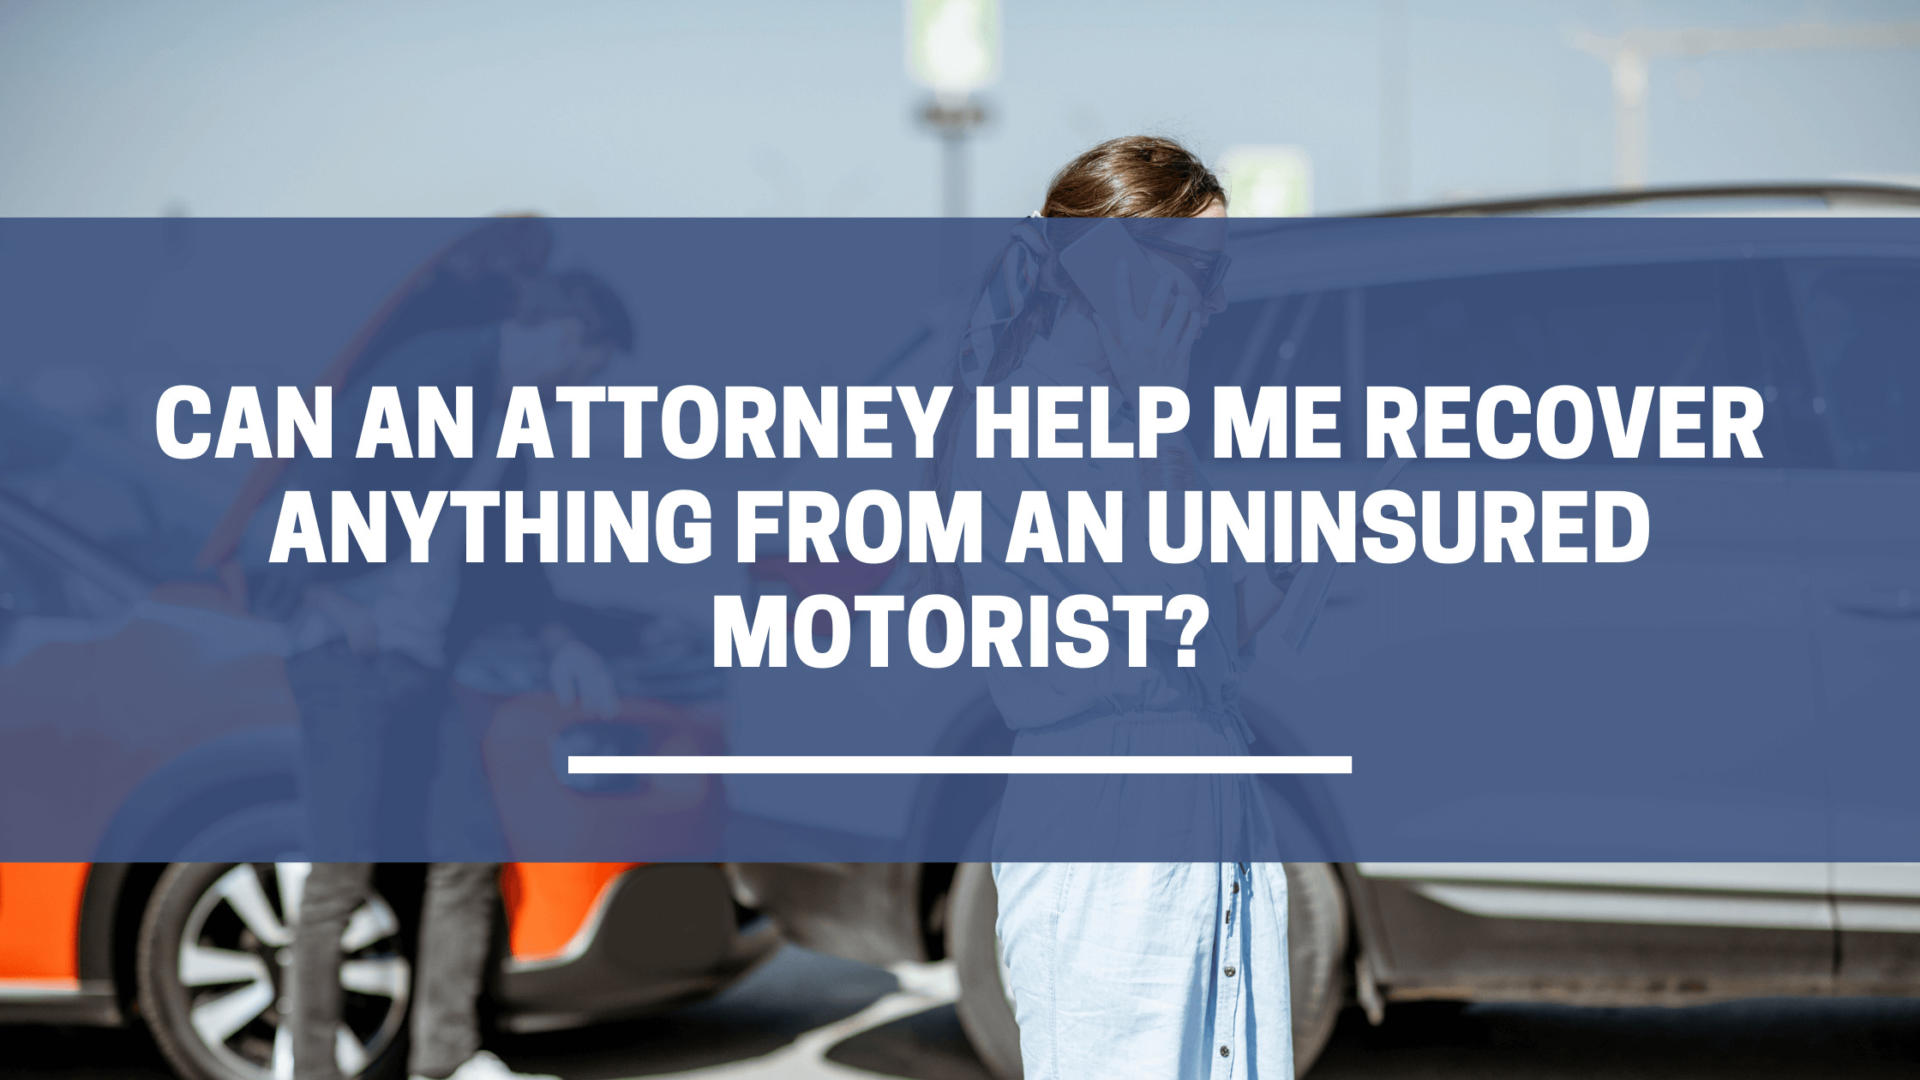 Can an Attorney Help Me Recover Anything From an Uninsured Motorist?